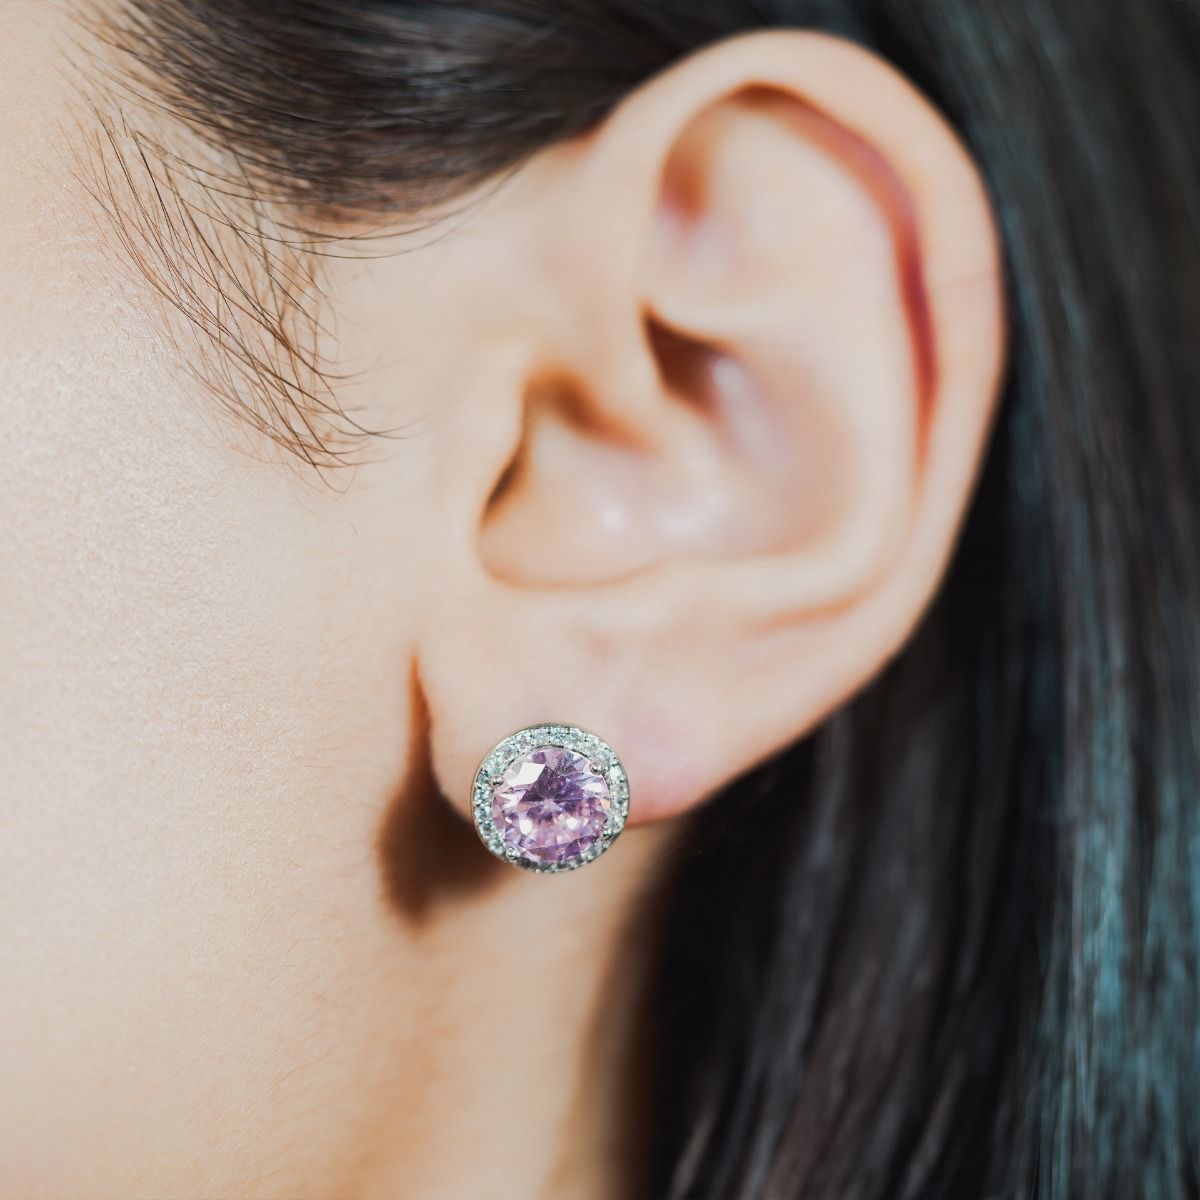 These dazzling stud earrings are set with a halo of flawlessly cut cubic zirconia stones, surrounding a sparkling round pink centre stone. Wear to add timeless glamour to any look.